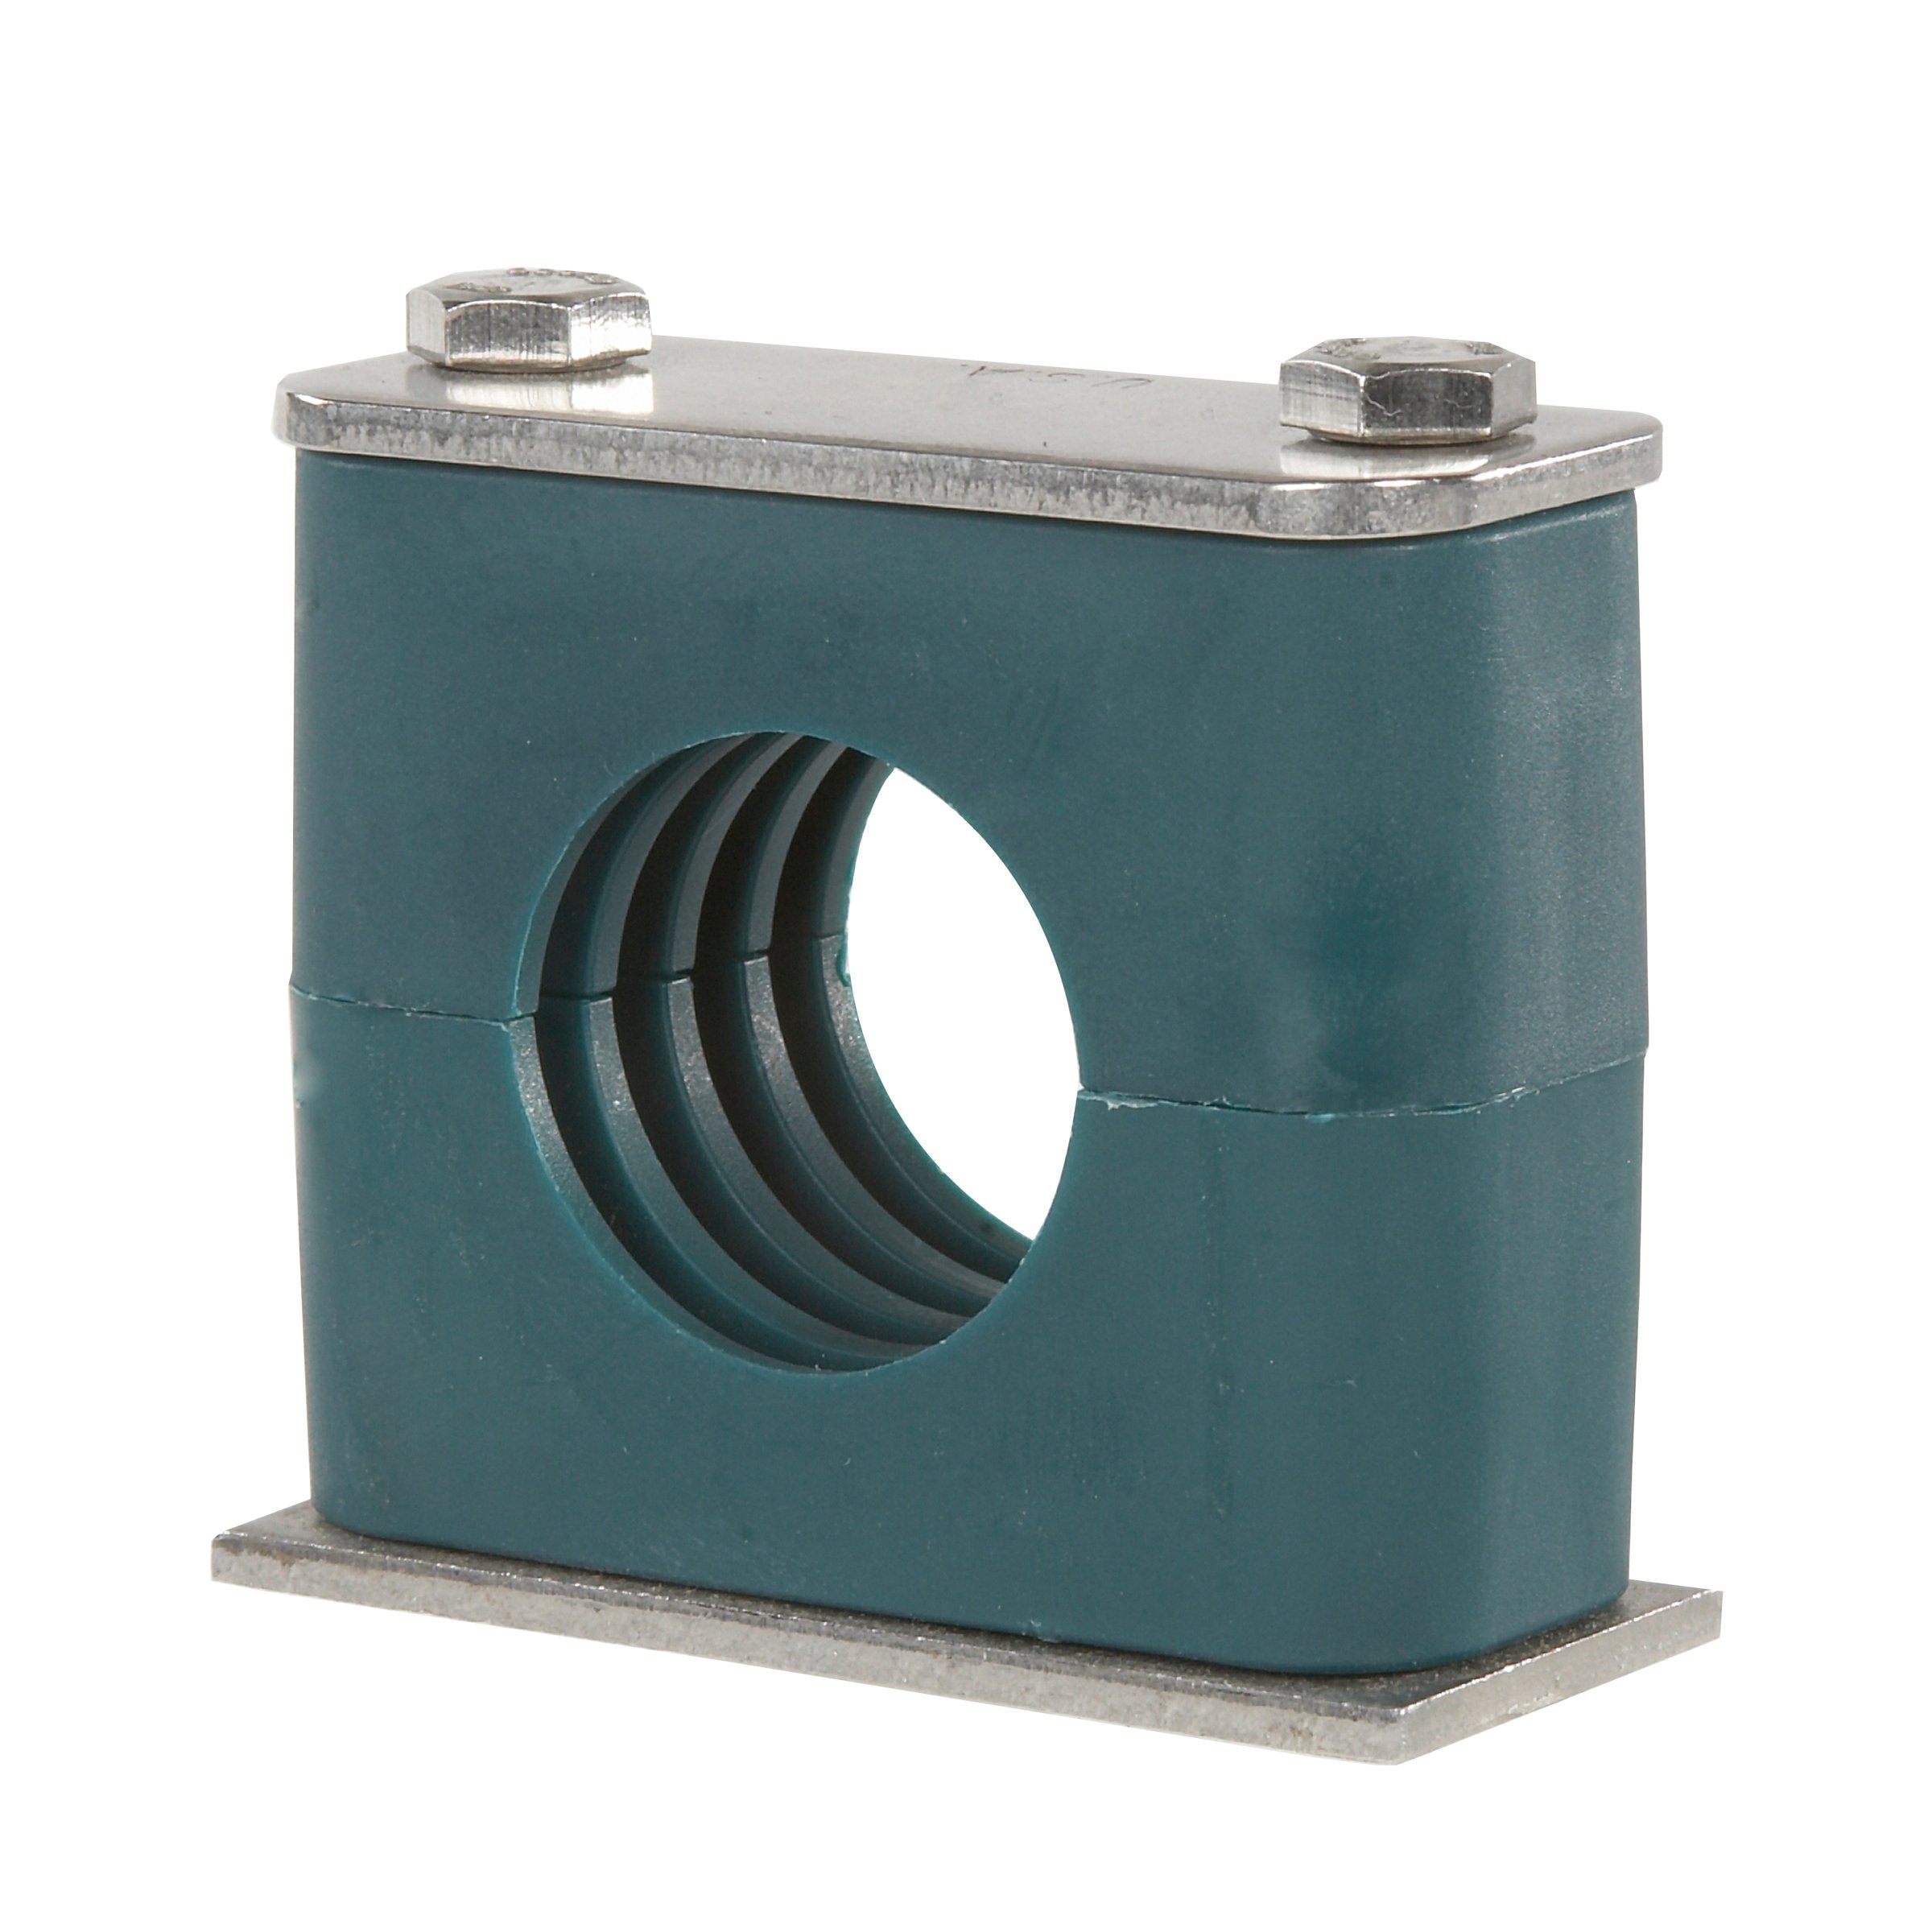 SP-109.5-PP-H-DP-AS-U-W10 : Stauff Clamp, Single Weld Plate, 0.375 inch (9.5mm) OD, for 3/8" Tube, Green PP Insert, Smooth Interior, Carbon Steel